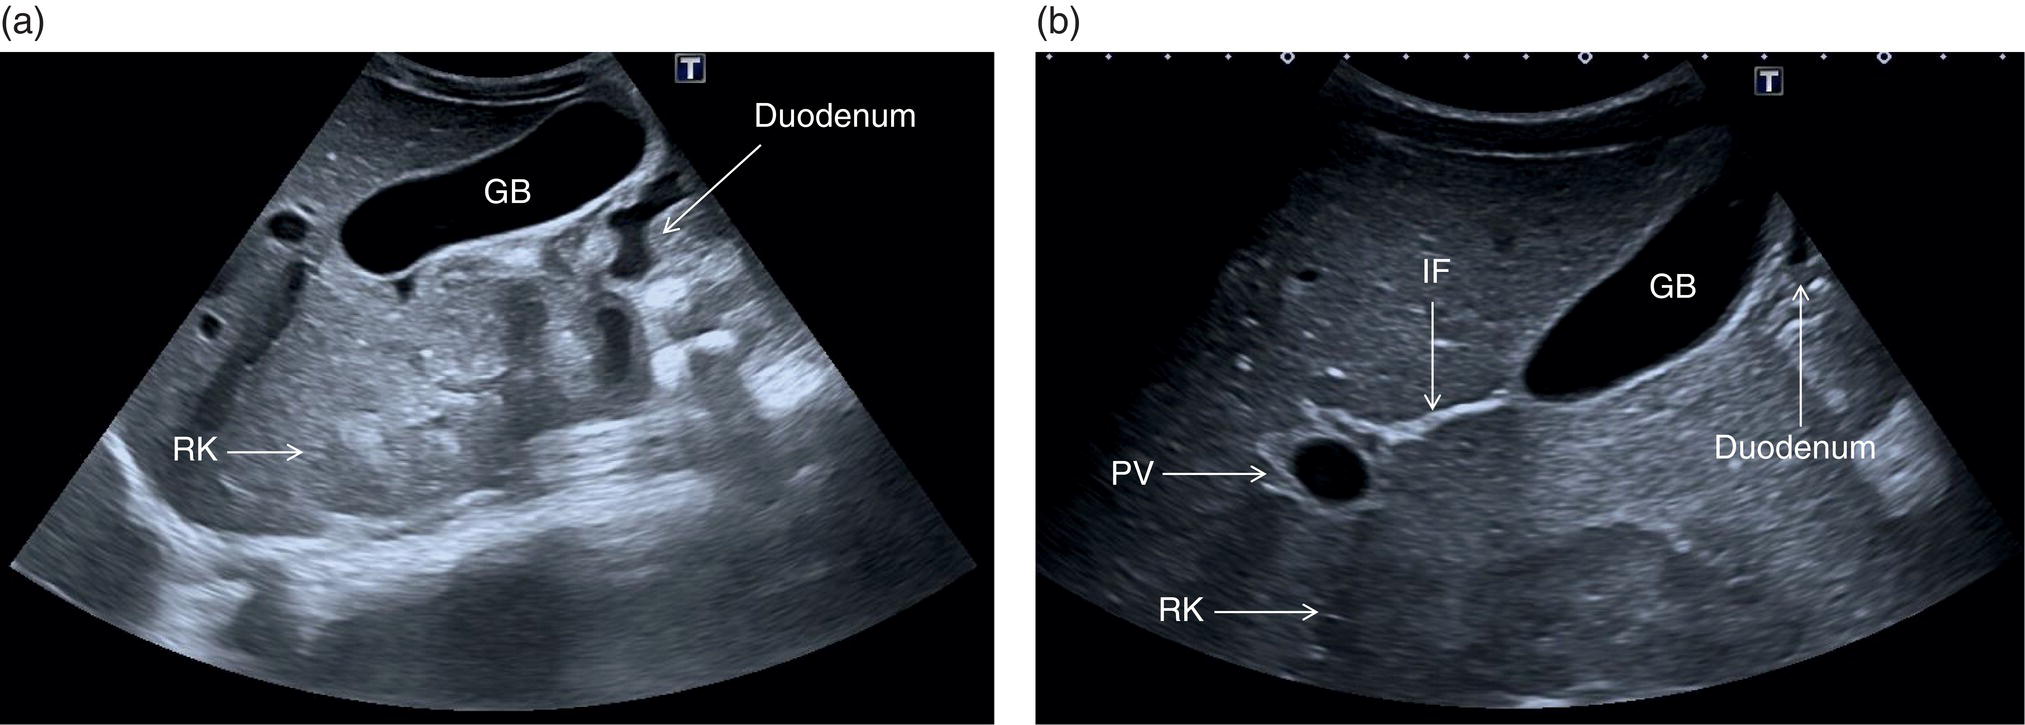 Two ultrasound scan images. 1. The ligamentum venosum, the left branch of the portal vein, and the inferior vena cava are labeled. 2. The ligamentum venosum and inferior vena cava are labeled. The left side image is clear compared to the right.